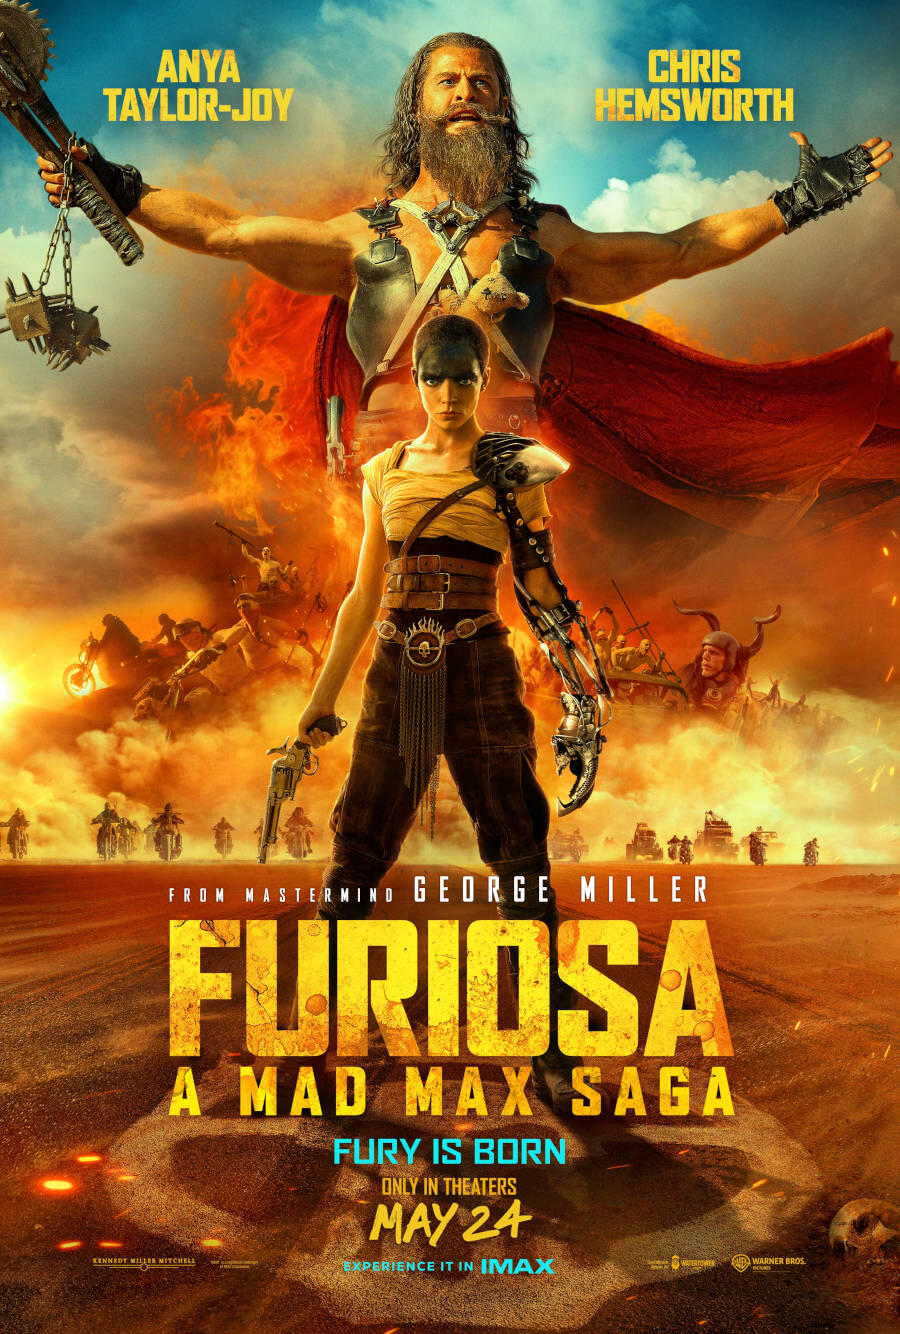 At The Movies with Richard Crouse "New Mad Max, a remake of Garfield and more""